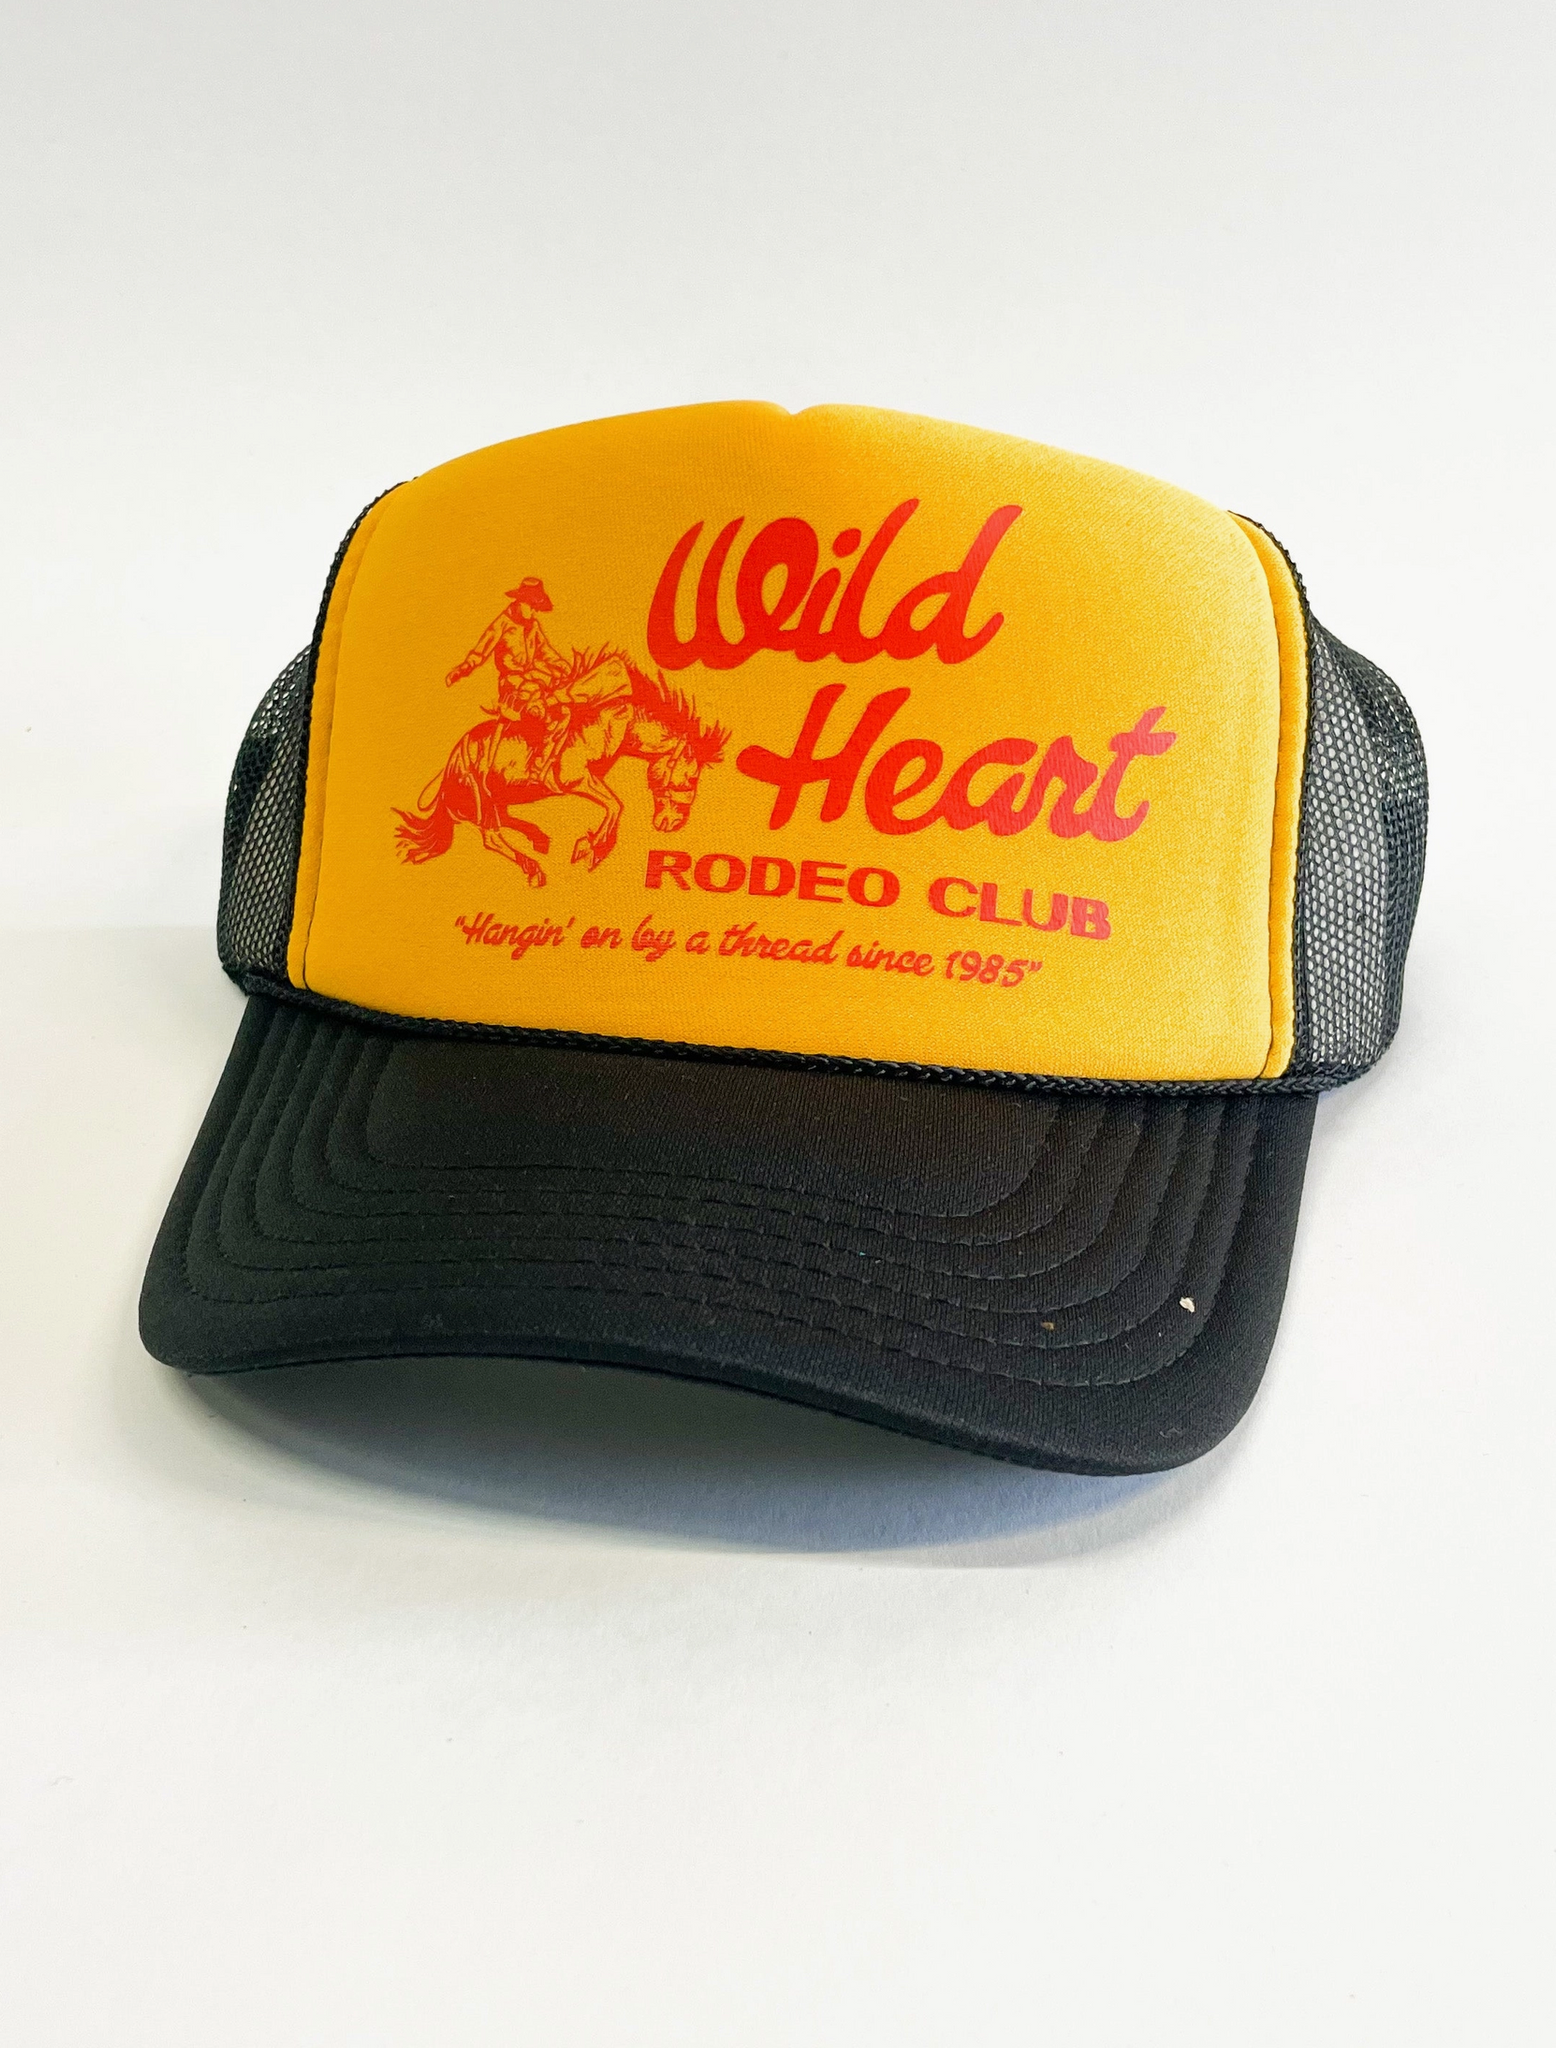 Wild Heart Rodeo Club Hangin' on by a Thread since 1985 vintage retro mesh back trucker hat by NB Goods sold by Le Monkey House